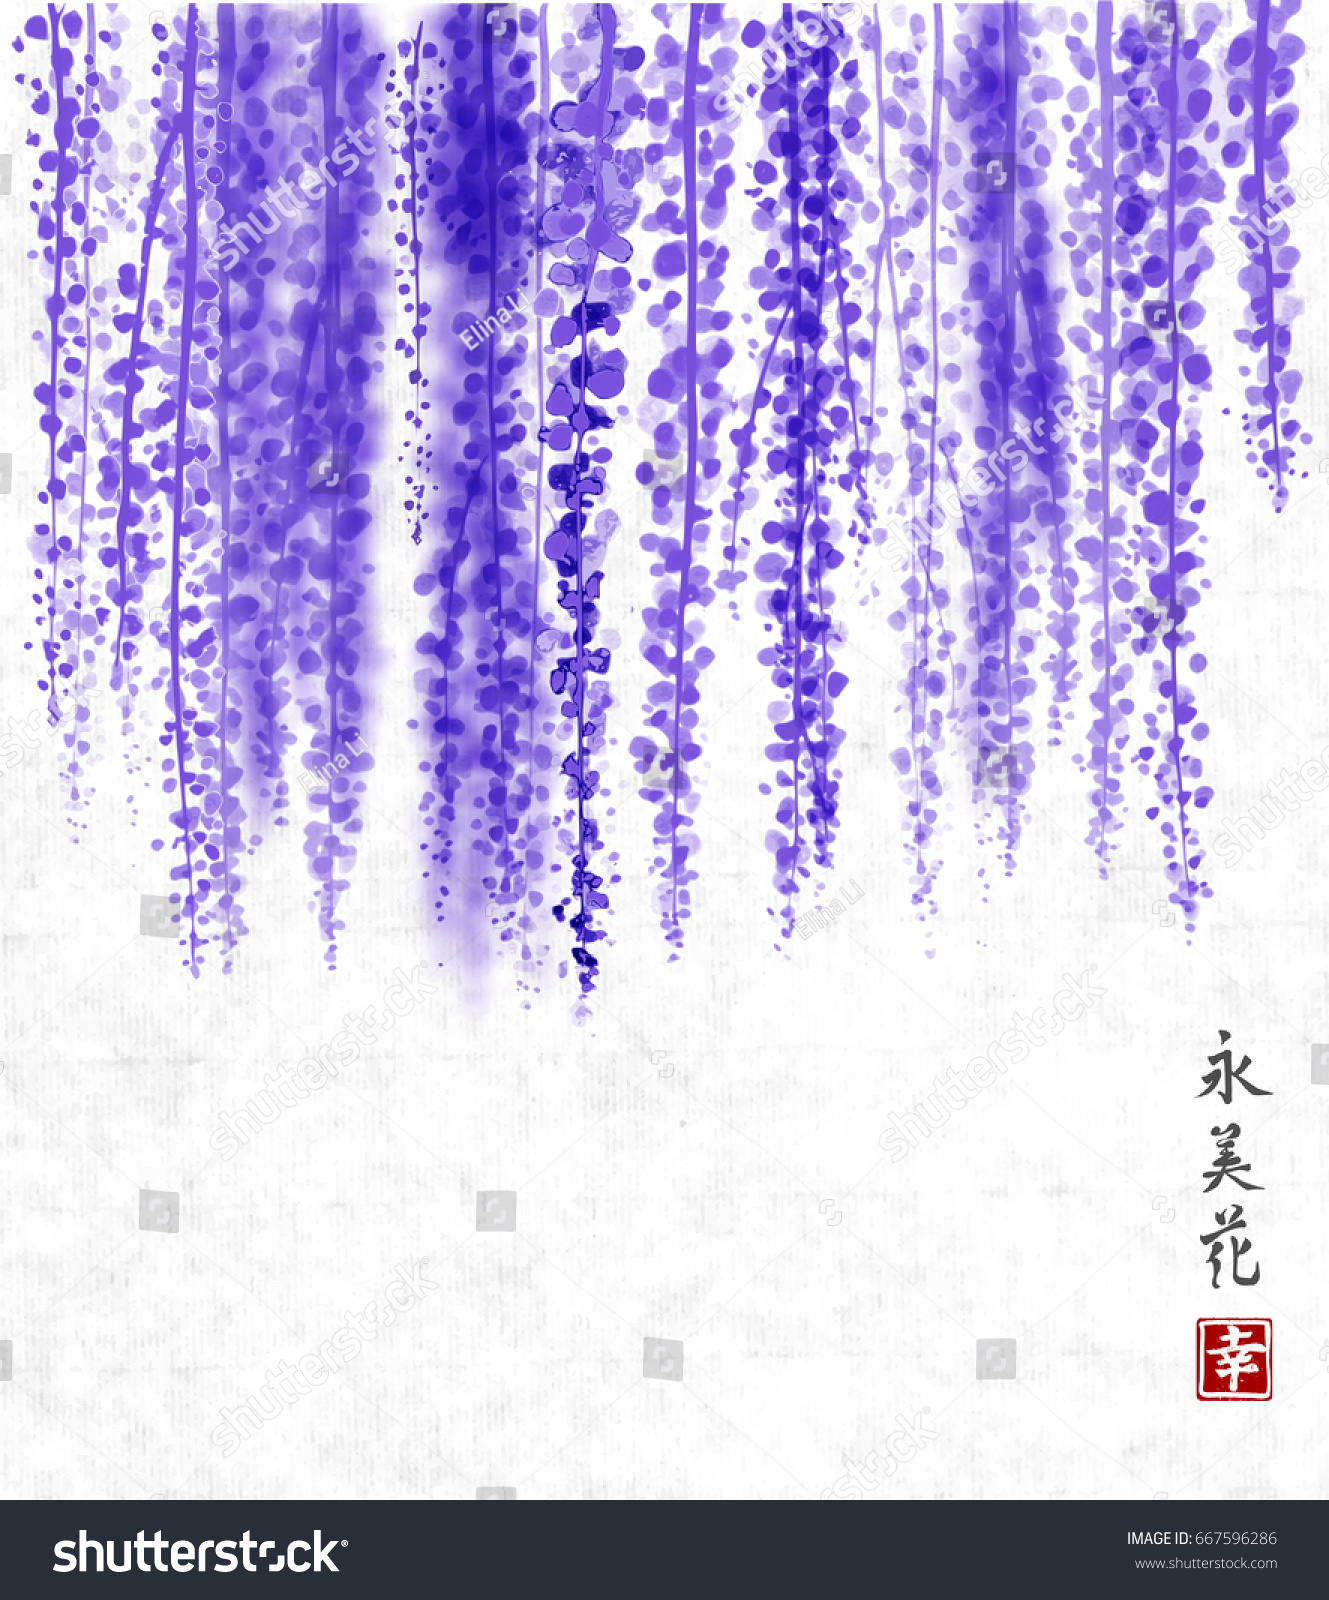 SVG of Wisteria hand drawn with ink on rice paper background. Contains hieroglyph - happiness, eternity, beauty, flower. Traditional oriental ink painting sumi-e, u-sin, go-hua. Bunches of flowers. svg